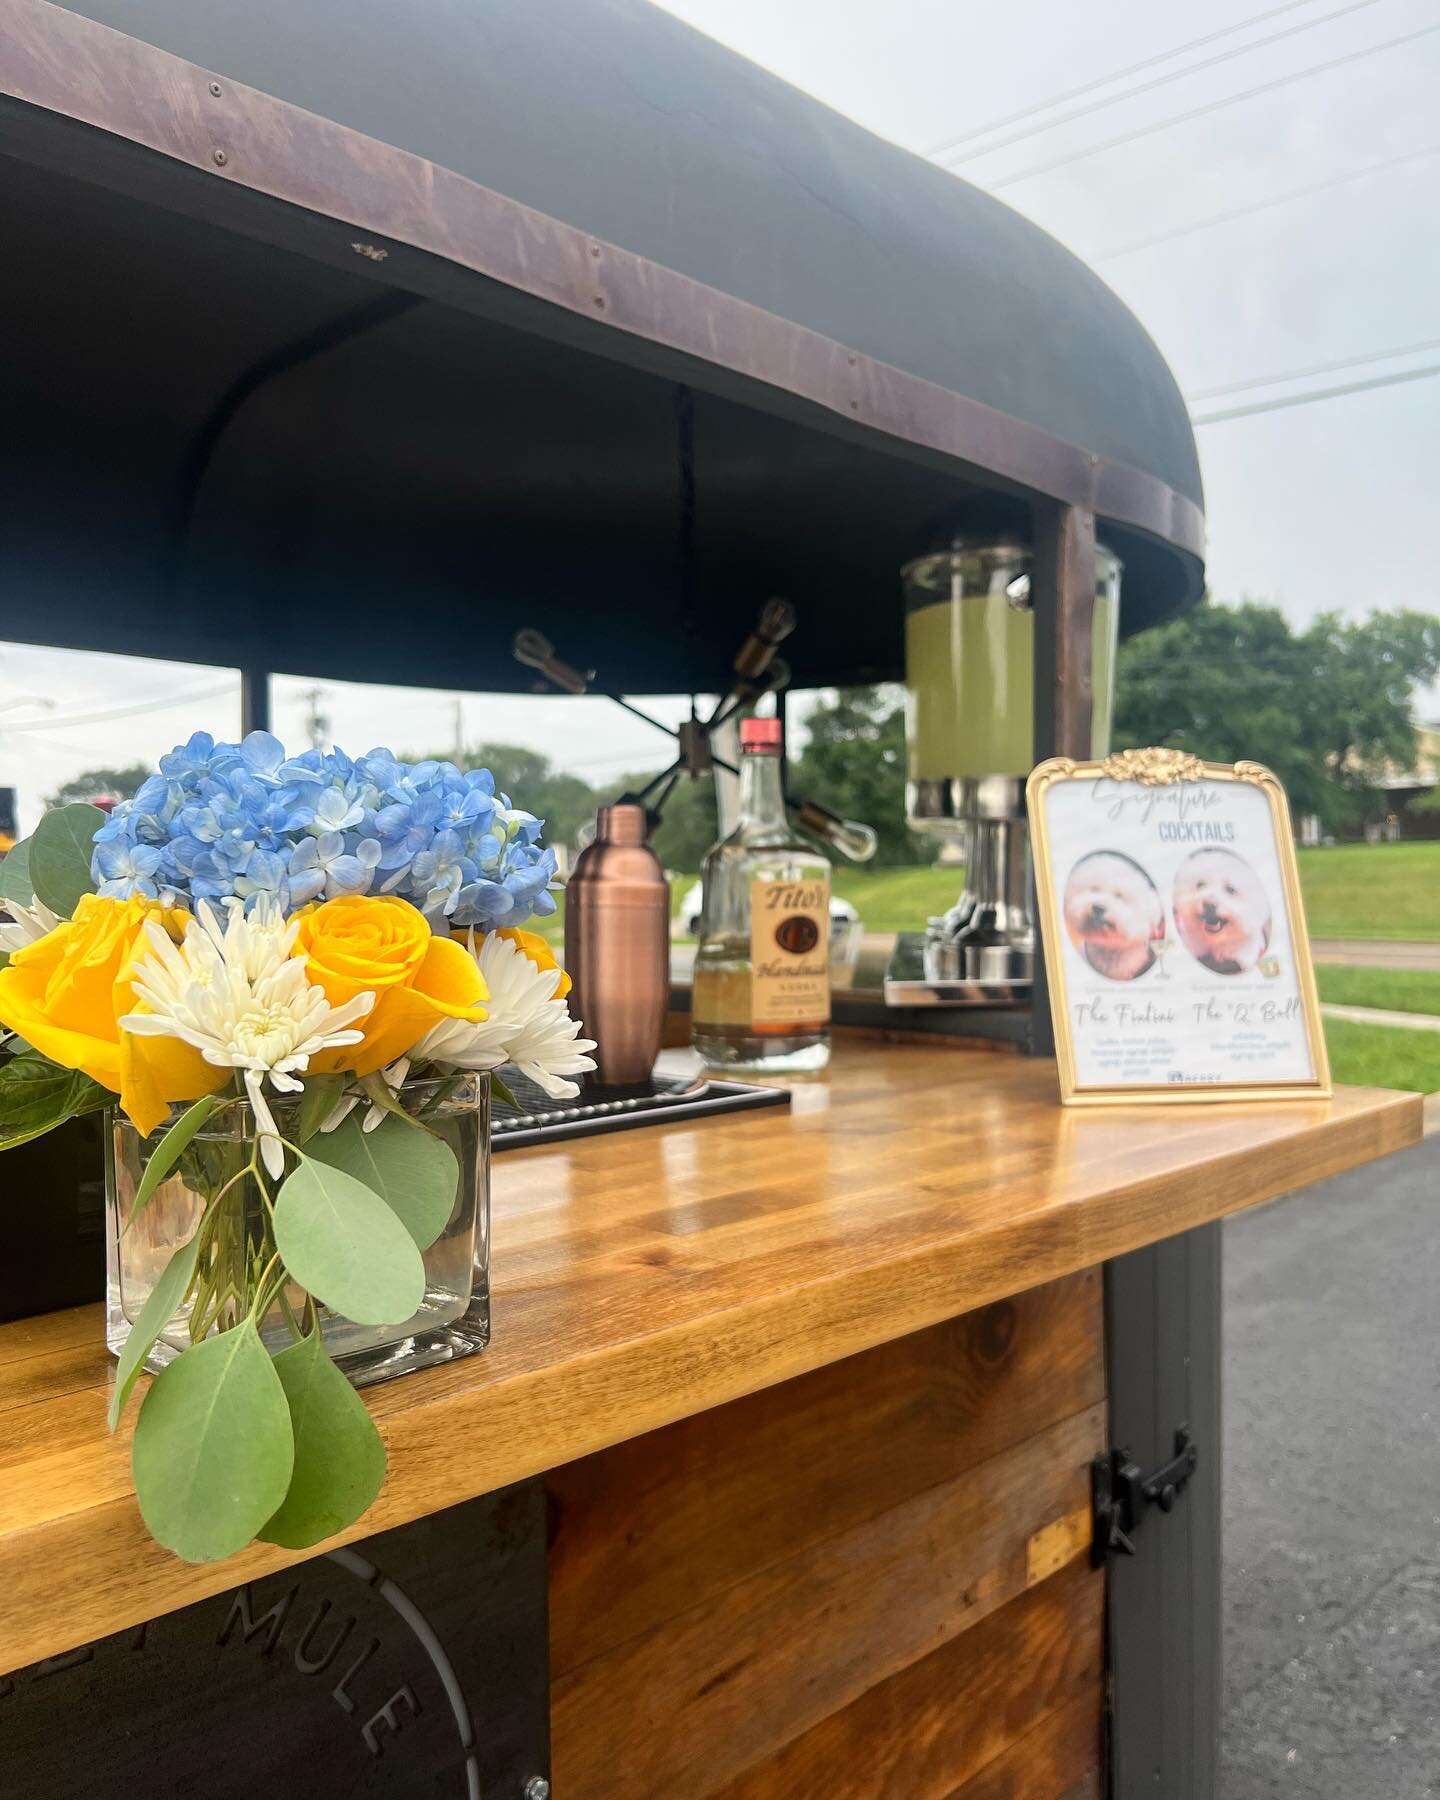 Happy 20th Anniversary @deberryinsuranceagency! We are so happy to be apart of this monumental event! Cheers to 20 years 🥂 #mobilebar #springhill #bartender #smallbusiness #insursnce #letsgetfizzy #nashville #columbiatn #20years